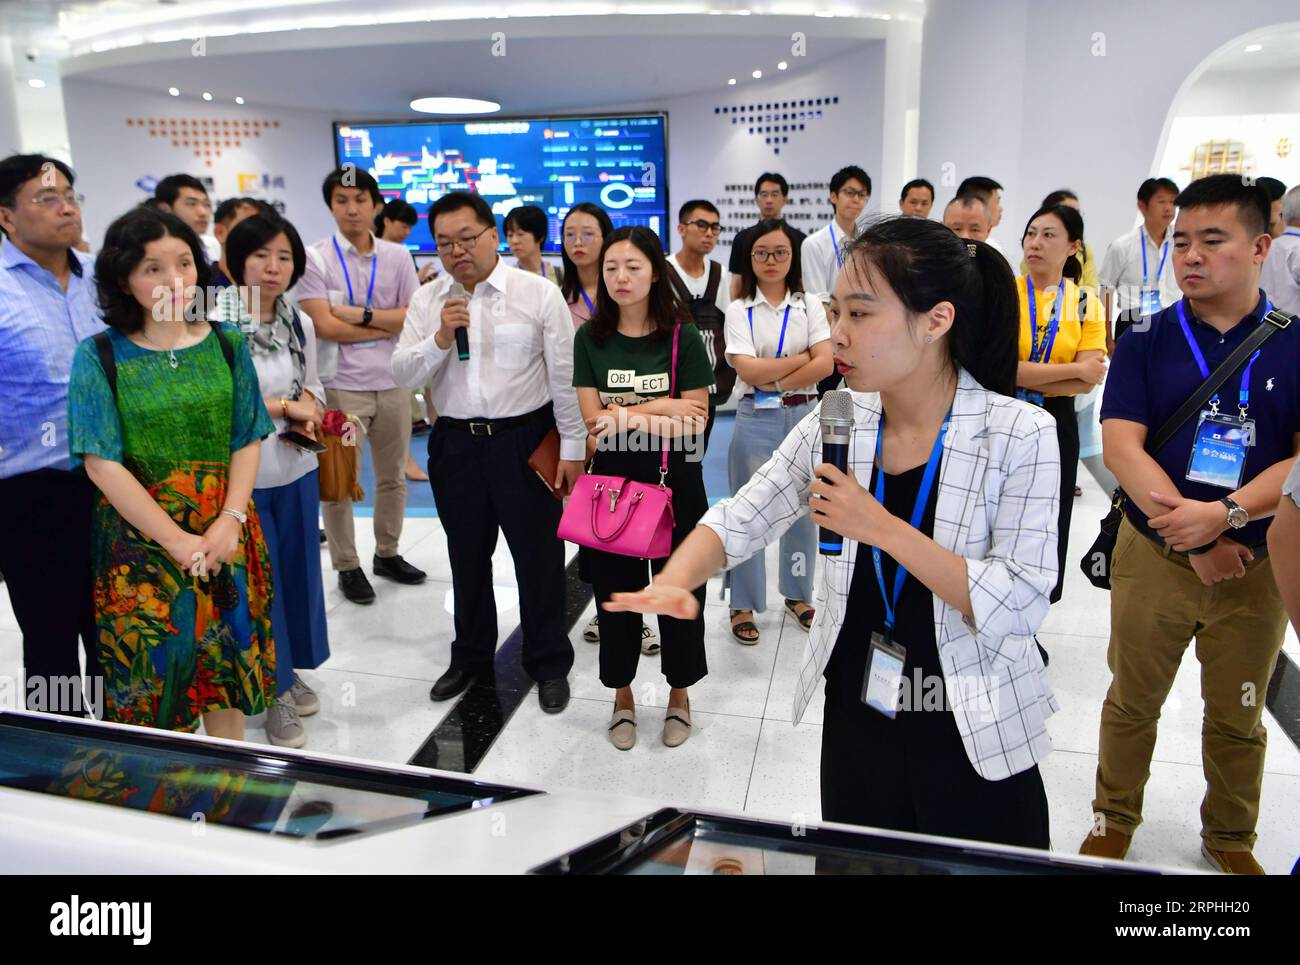 191108 -- BEIJING, Nov. 8, 2019 -- A staff introduces Fuyao Group s glass technologies to visitors from Japan in Fuqing, southeast China s Fujian Province, Aug. 23, 2019.  Xinhua Headlines: China s growth and prosperity attract Chinese expats to return home WeixPeiquan PUBLICATIONxNOTxINxCHN Stock Photo